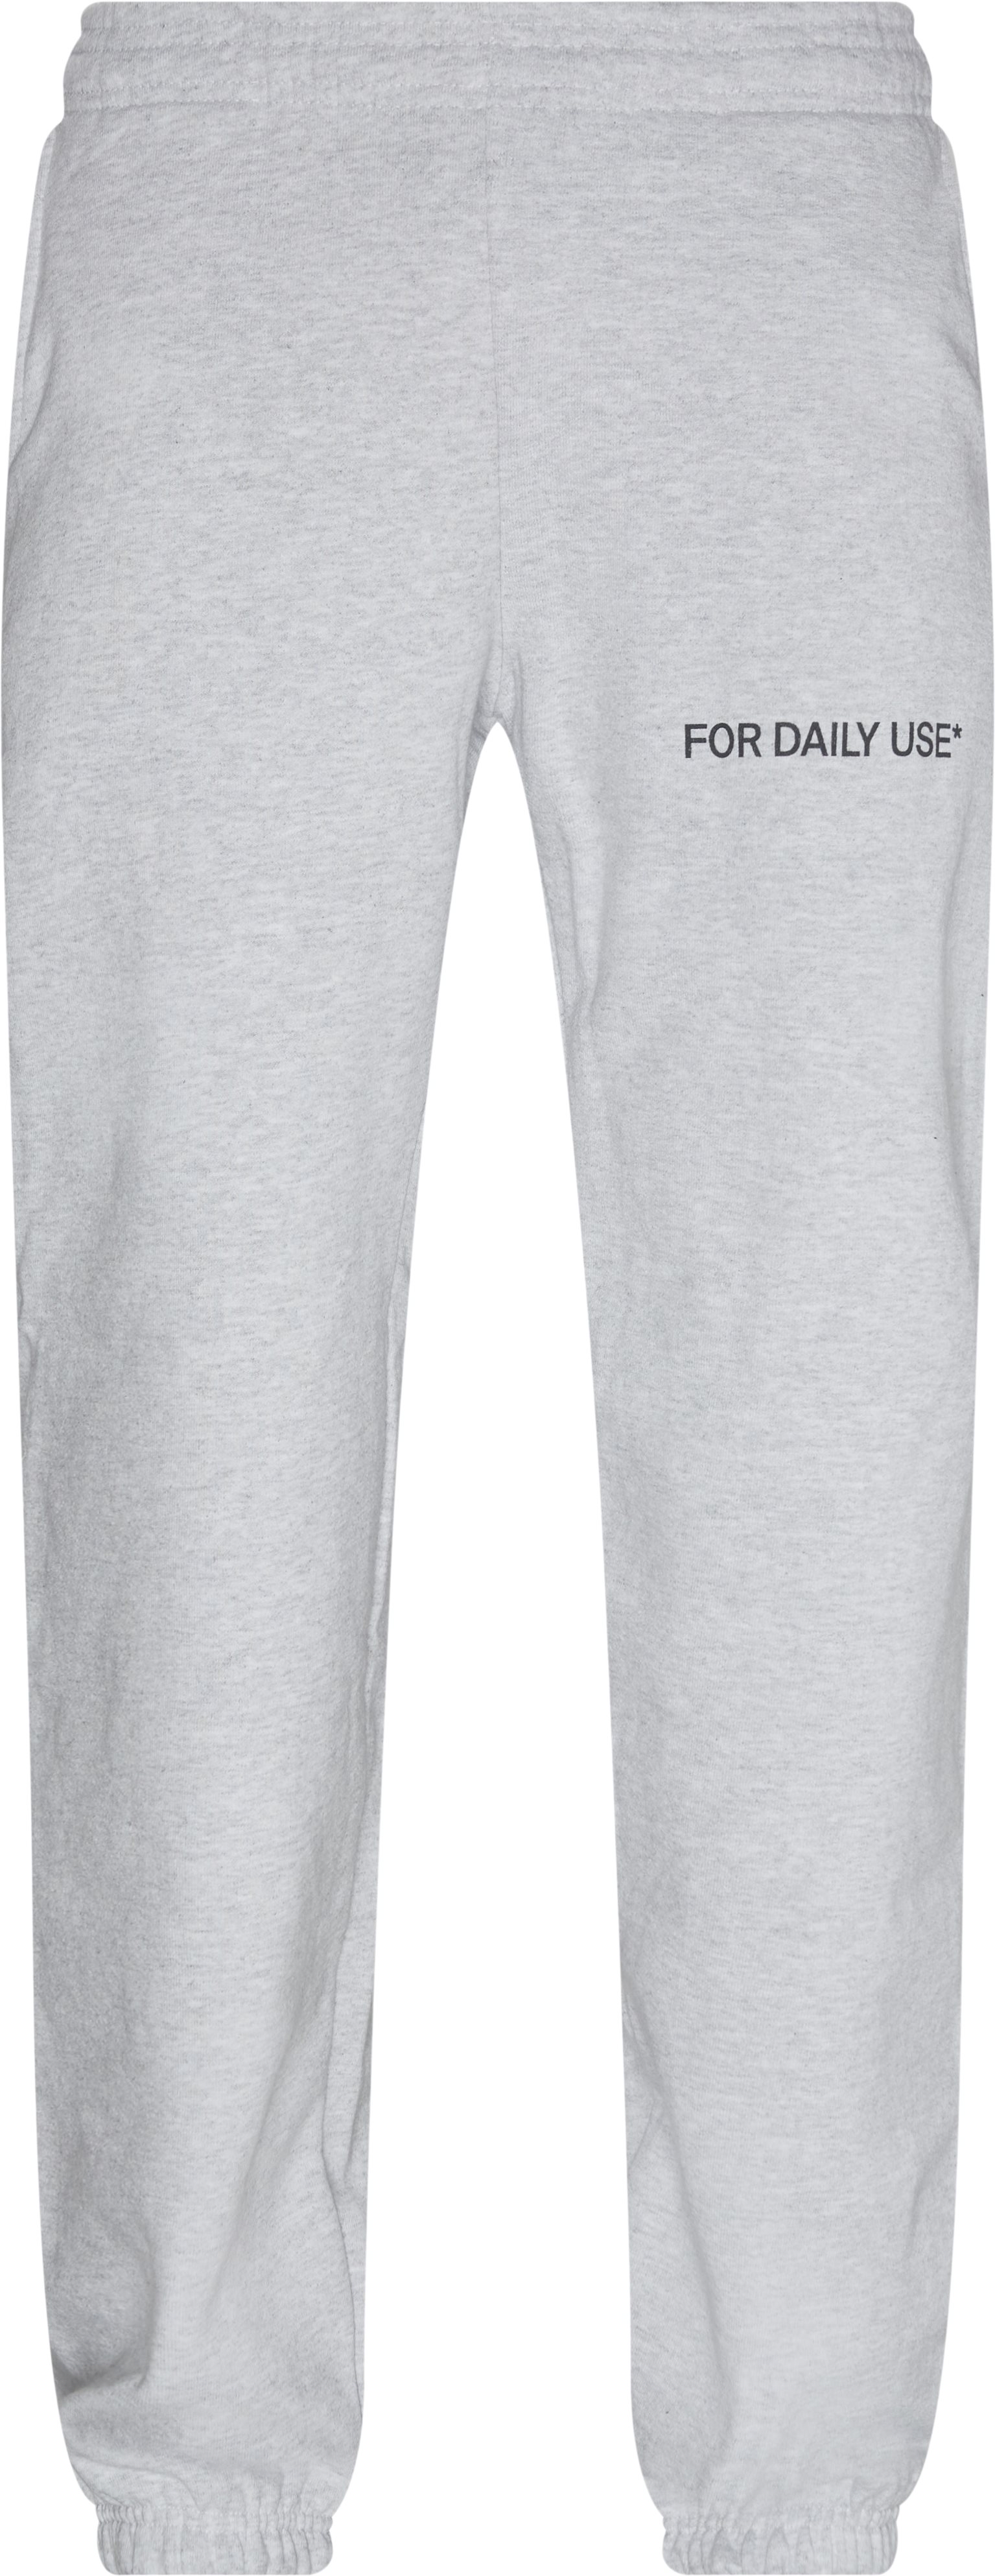 For Daily Use Pants - Tracksuits - Regular fit - Grå